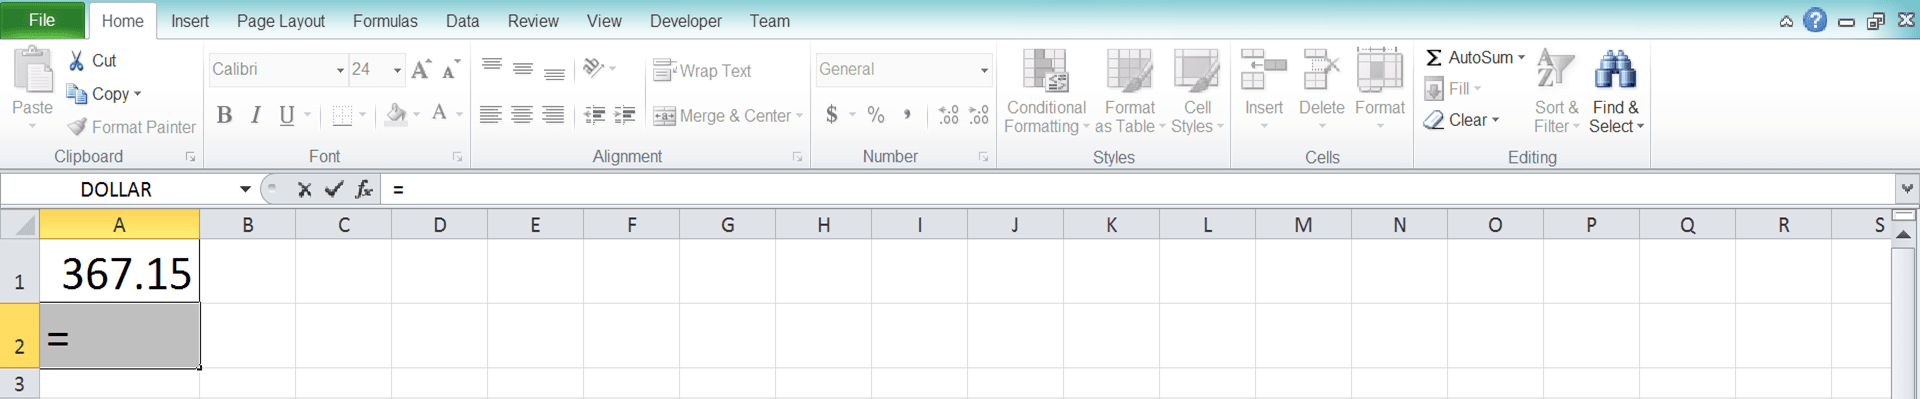 Excel ROUNDUP Formula: Functions, Examples, and How to Use - Screenshot of Step 1